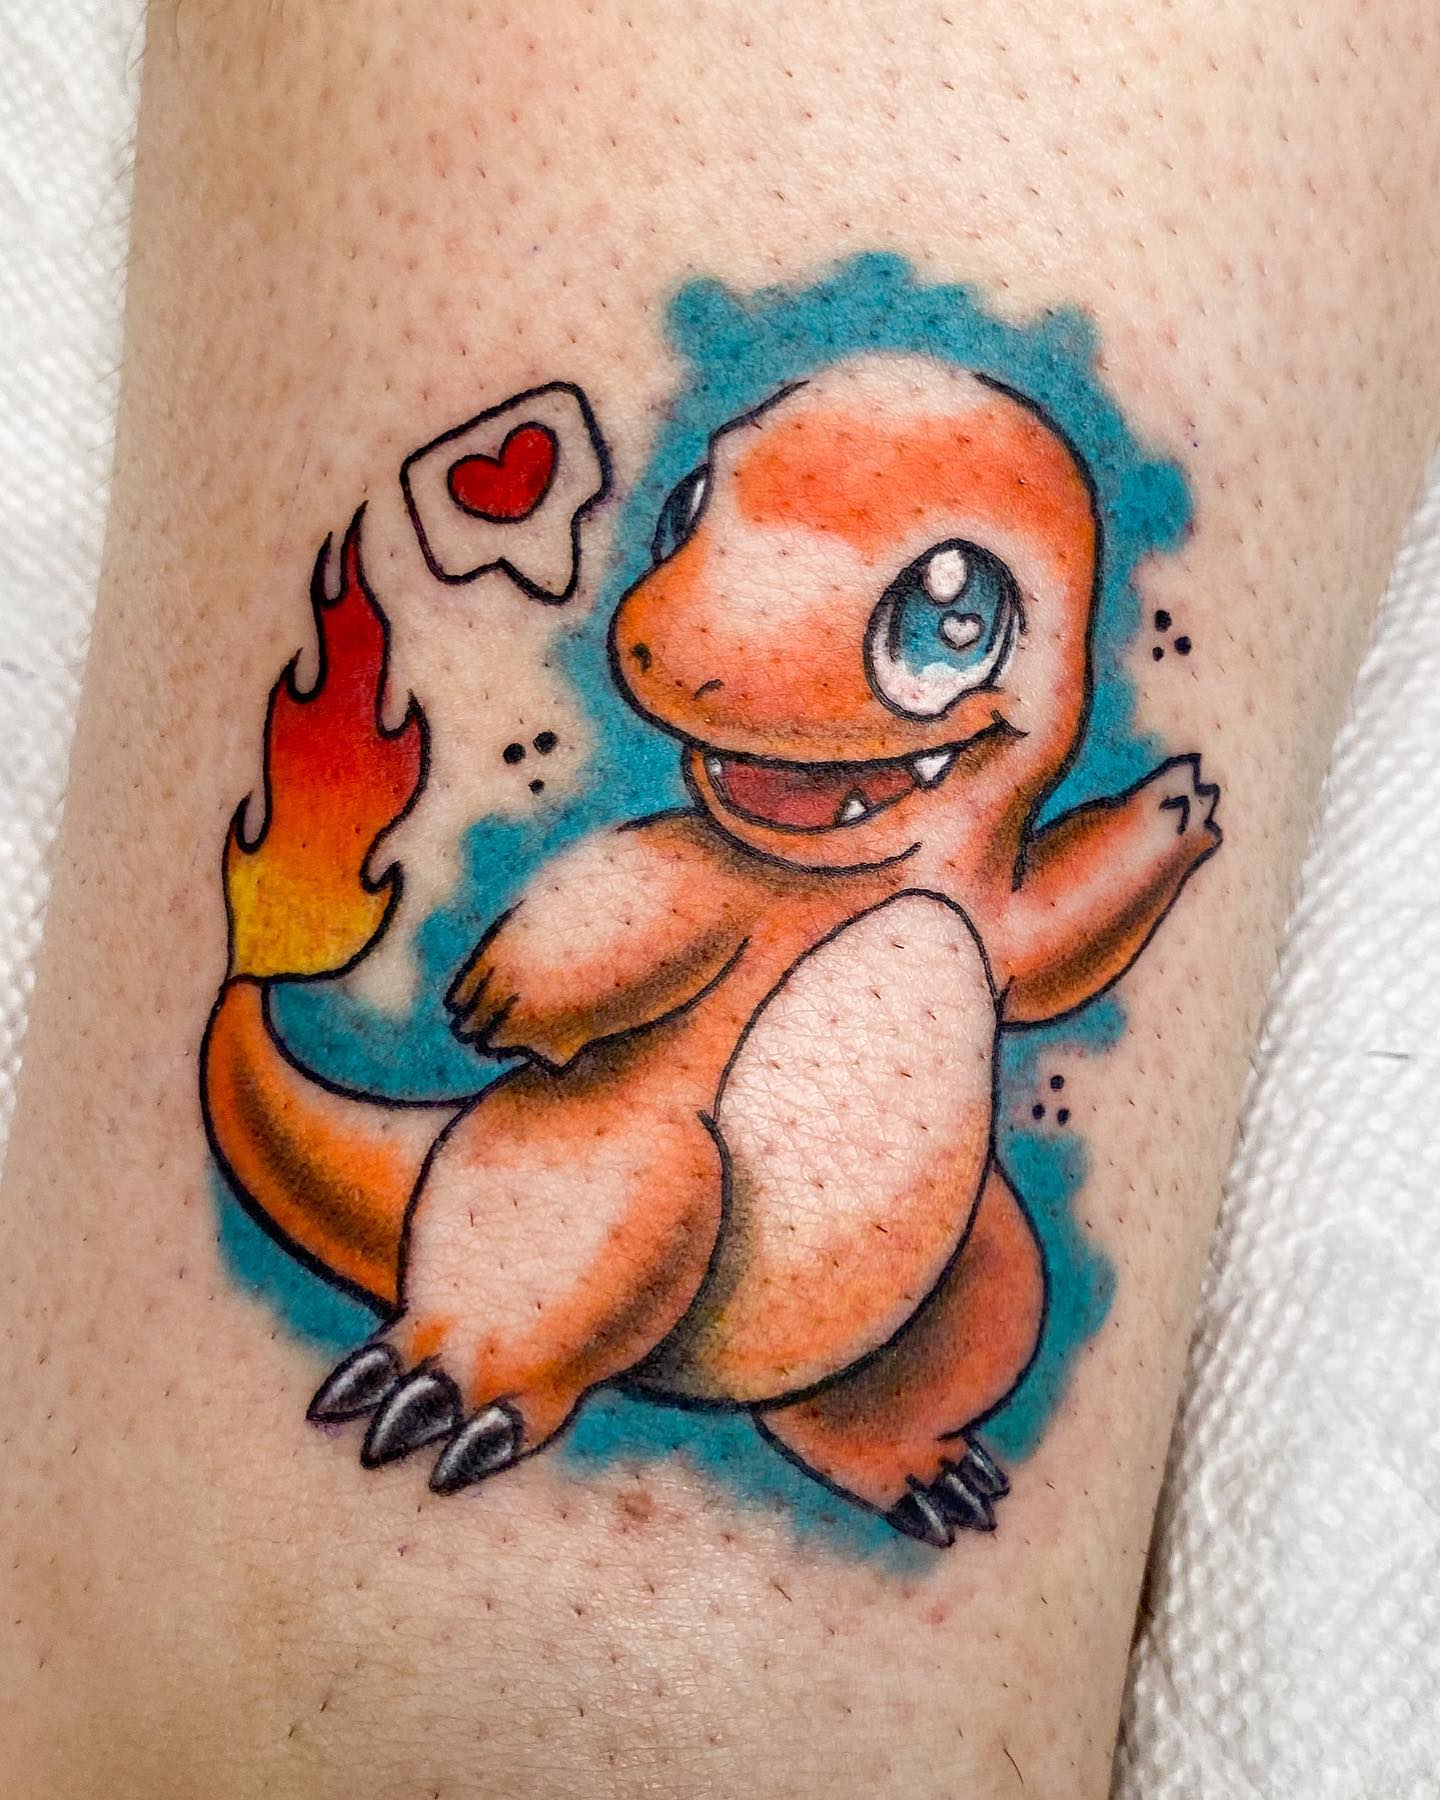 Charmander is a fire-type Pokémon that evolves into Charmeleon. It's the first Pokémon Ash ever caught, and it's one of his most prized Pokémon. The Charmander tattoo represents your love for the Pokémon and its evolution.